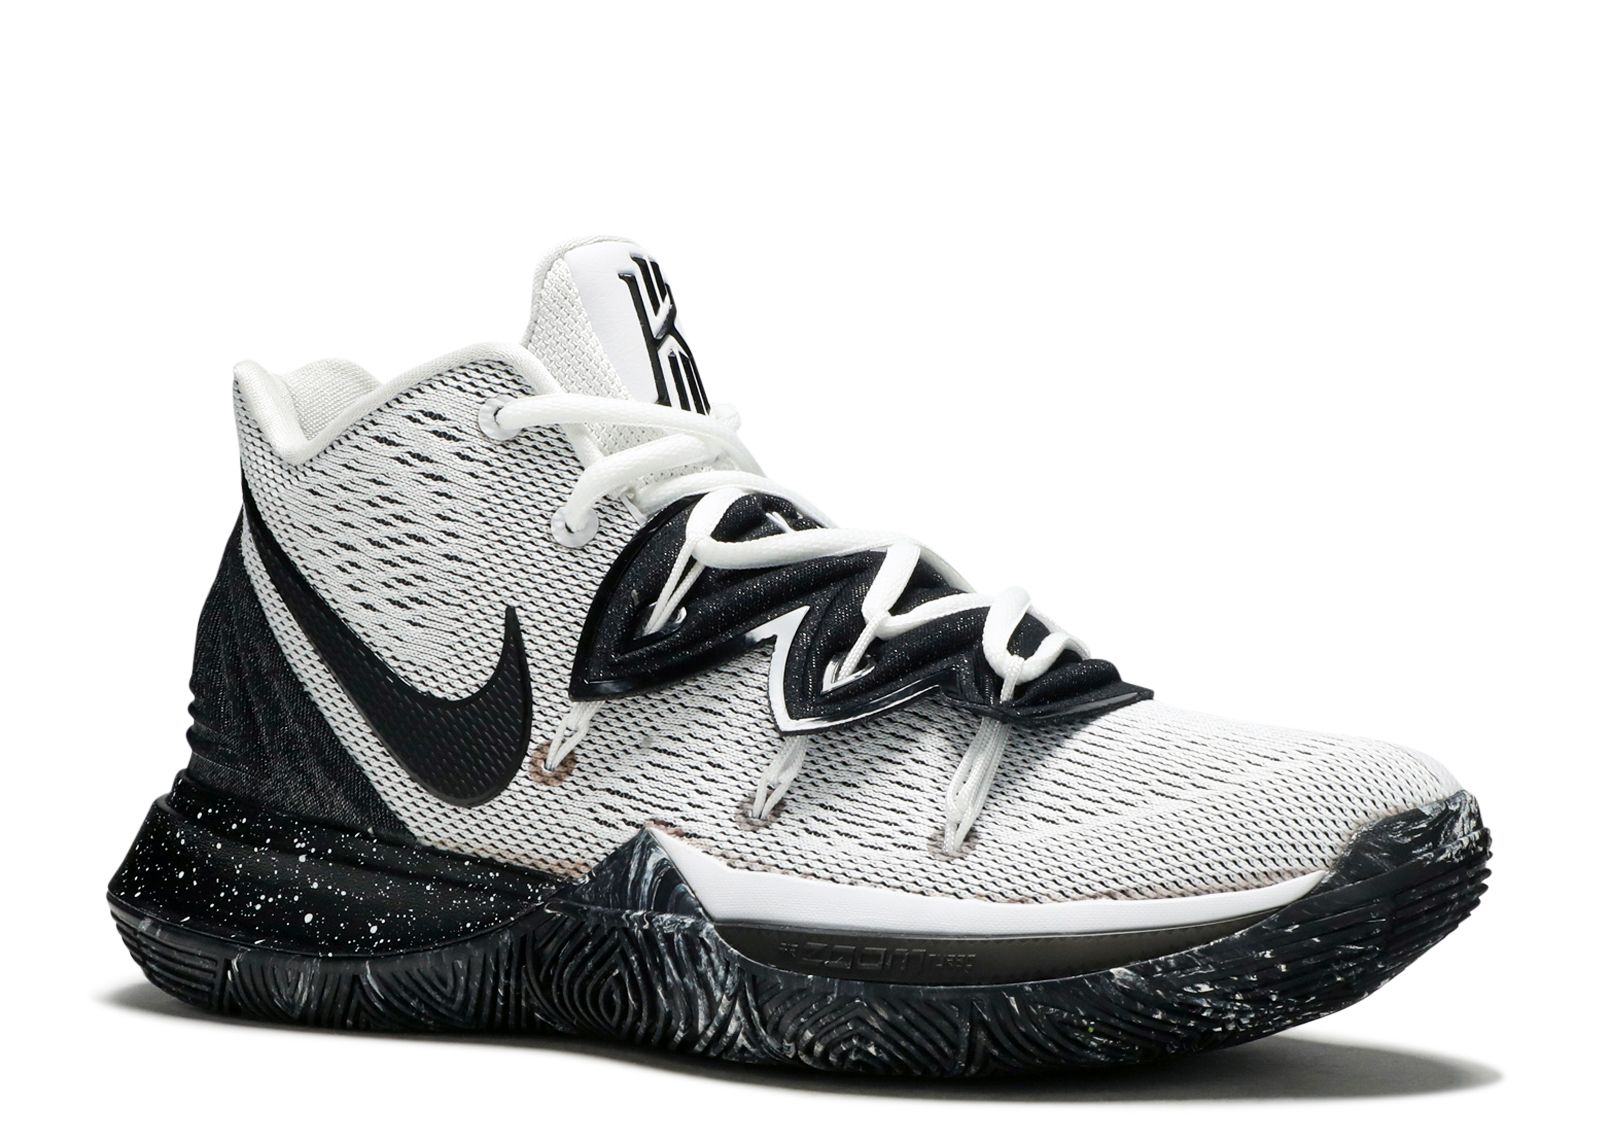 kyrie irving cookies and cream